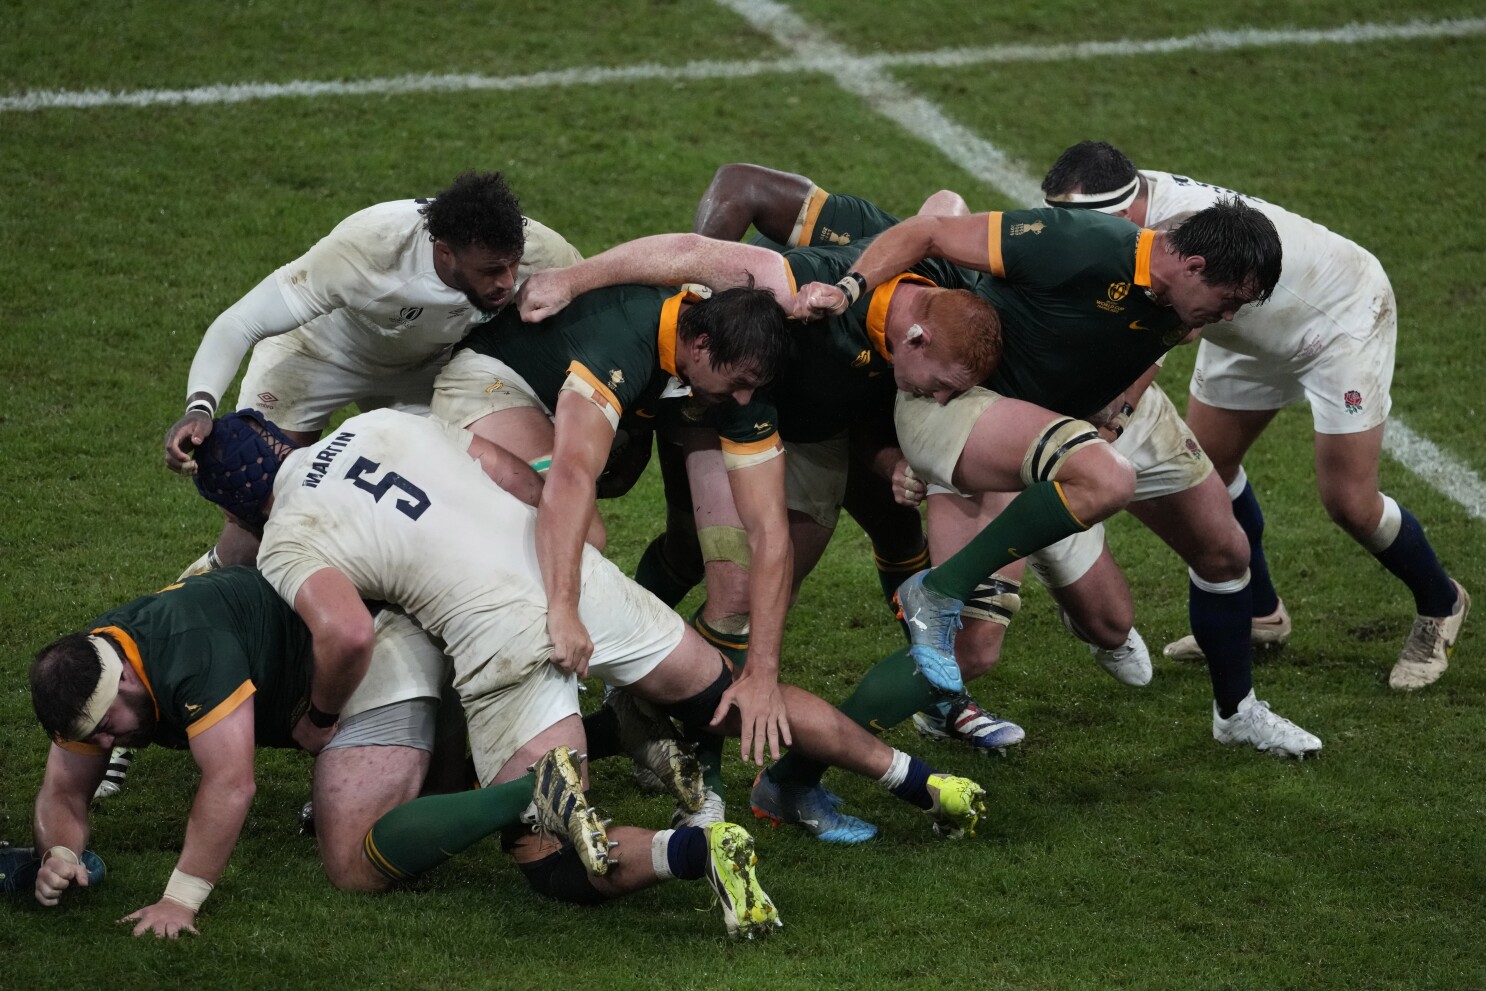 New men's global rugby competition starting in 2026 hailed and assailed